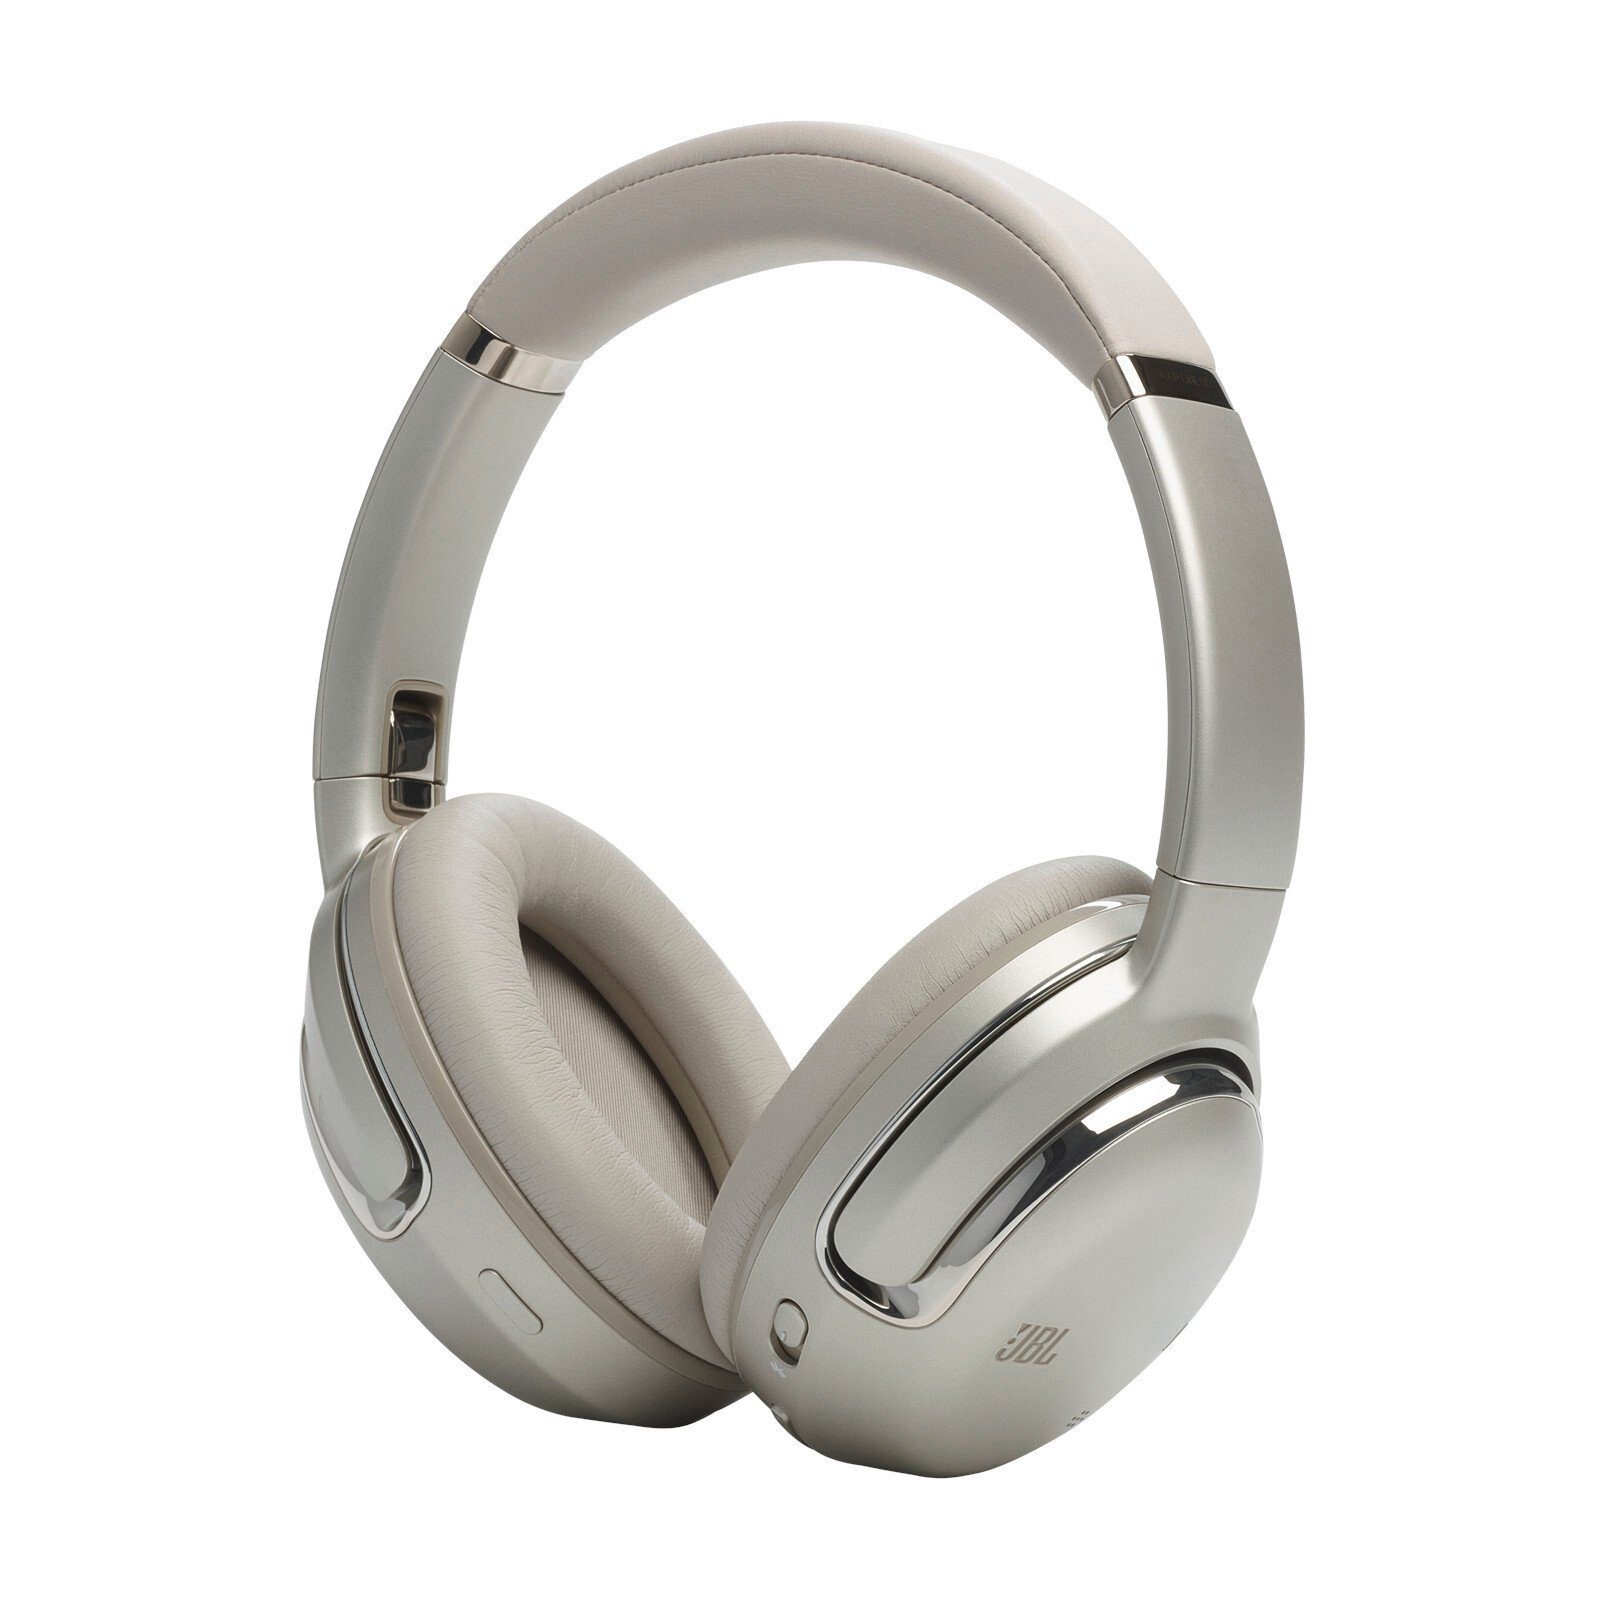 (Noise-Cancelling) Champagne M2 TOUR JBL ONE Headset